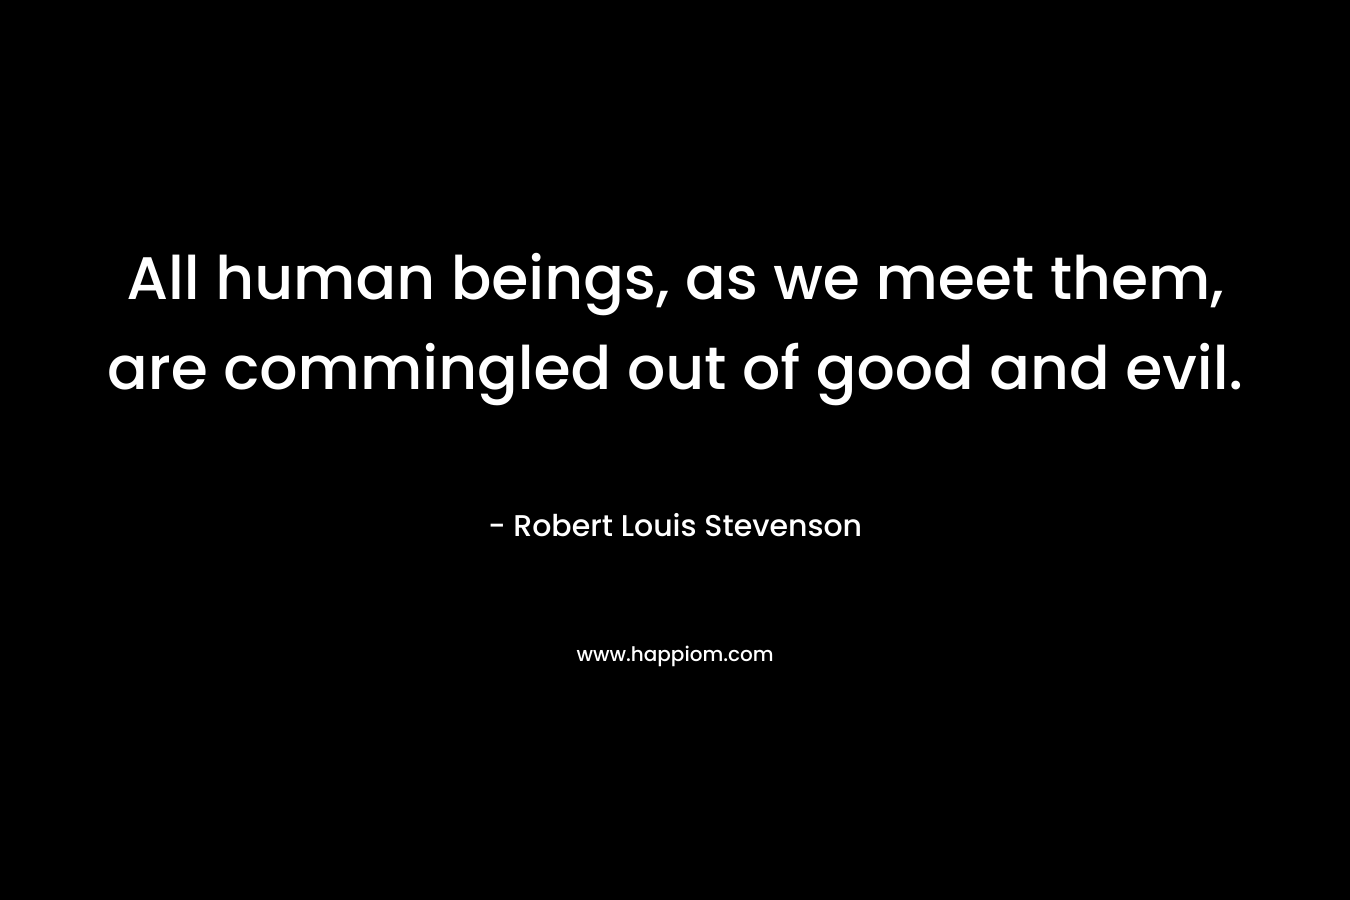 All human beings, as we meet them, are commingled out of good and evil. – Robert Louis Stevenson